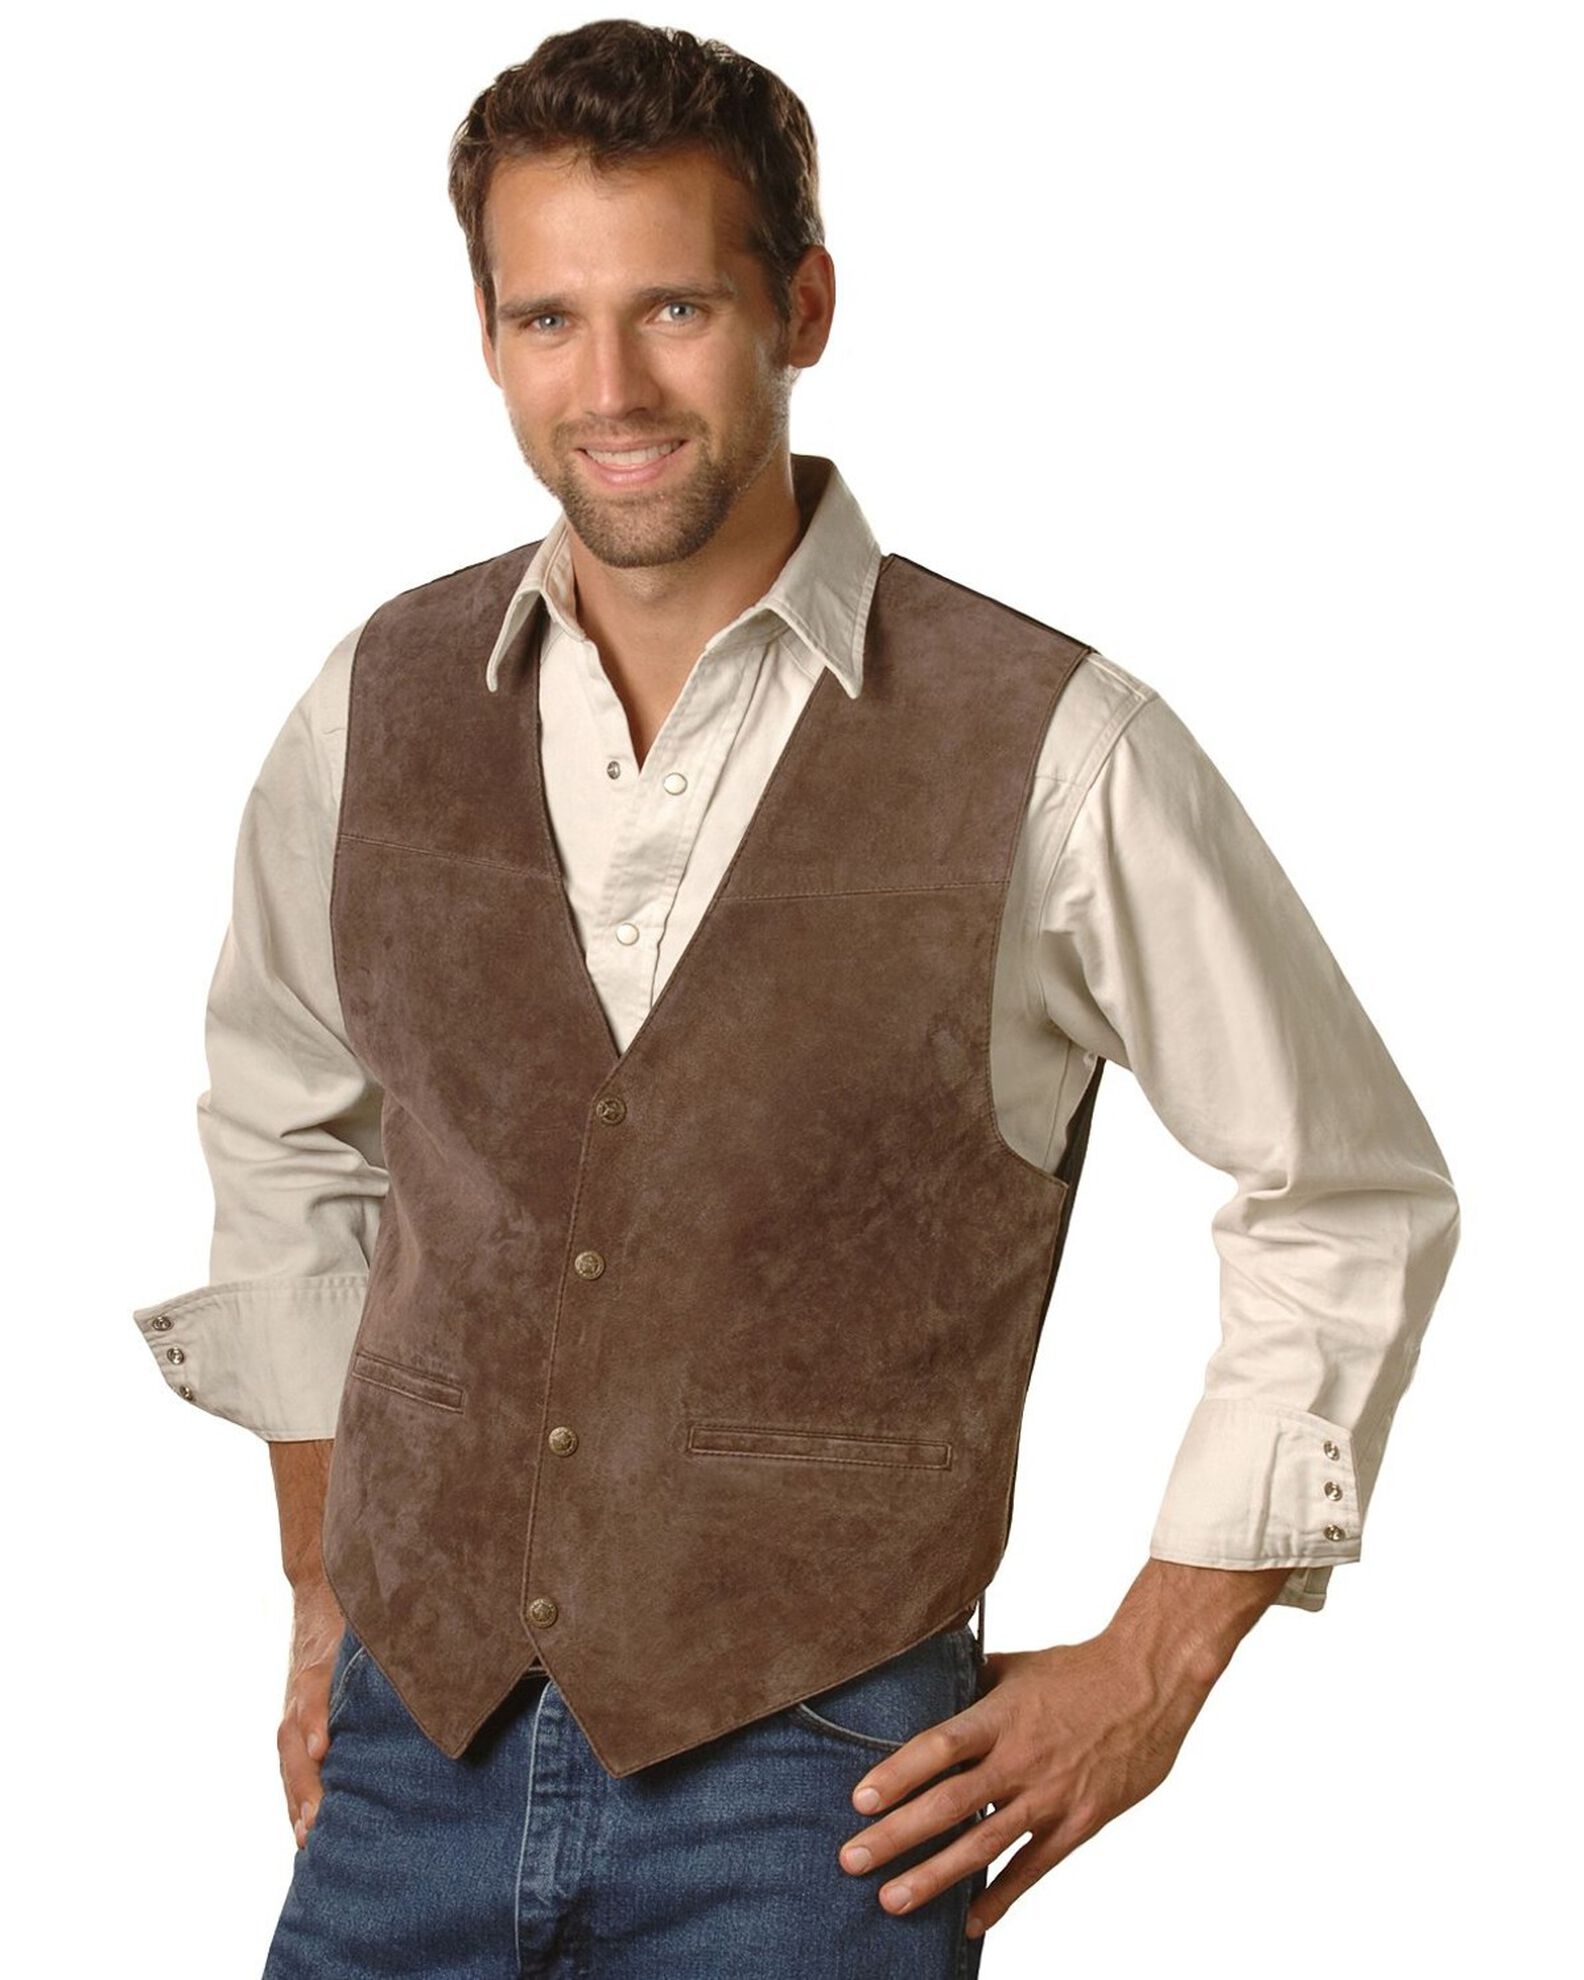 Product Name: Scully Men's Suede Leather Vest